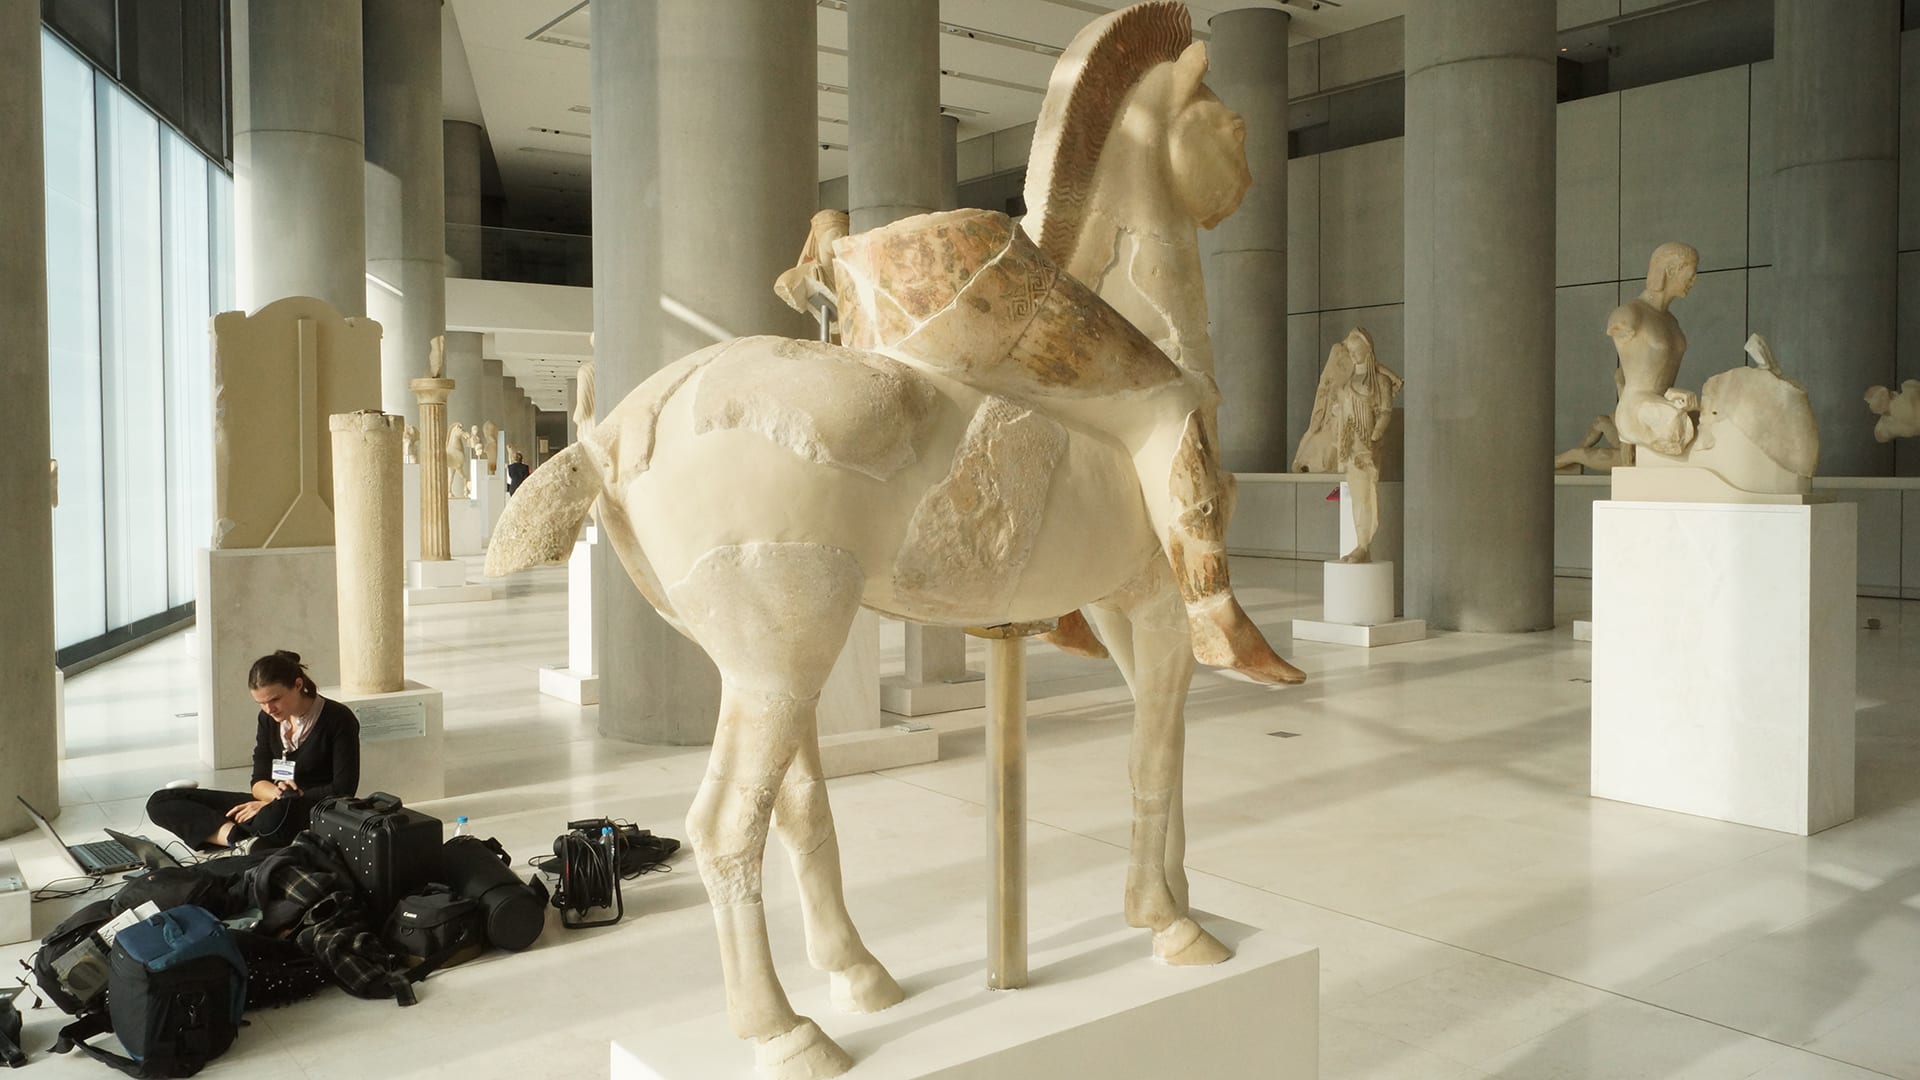 3D scanning for Acropolis Museum of Athens